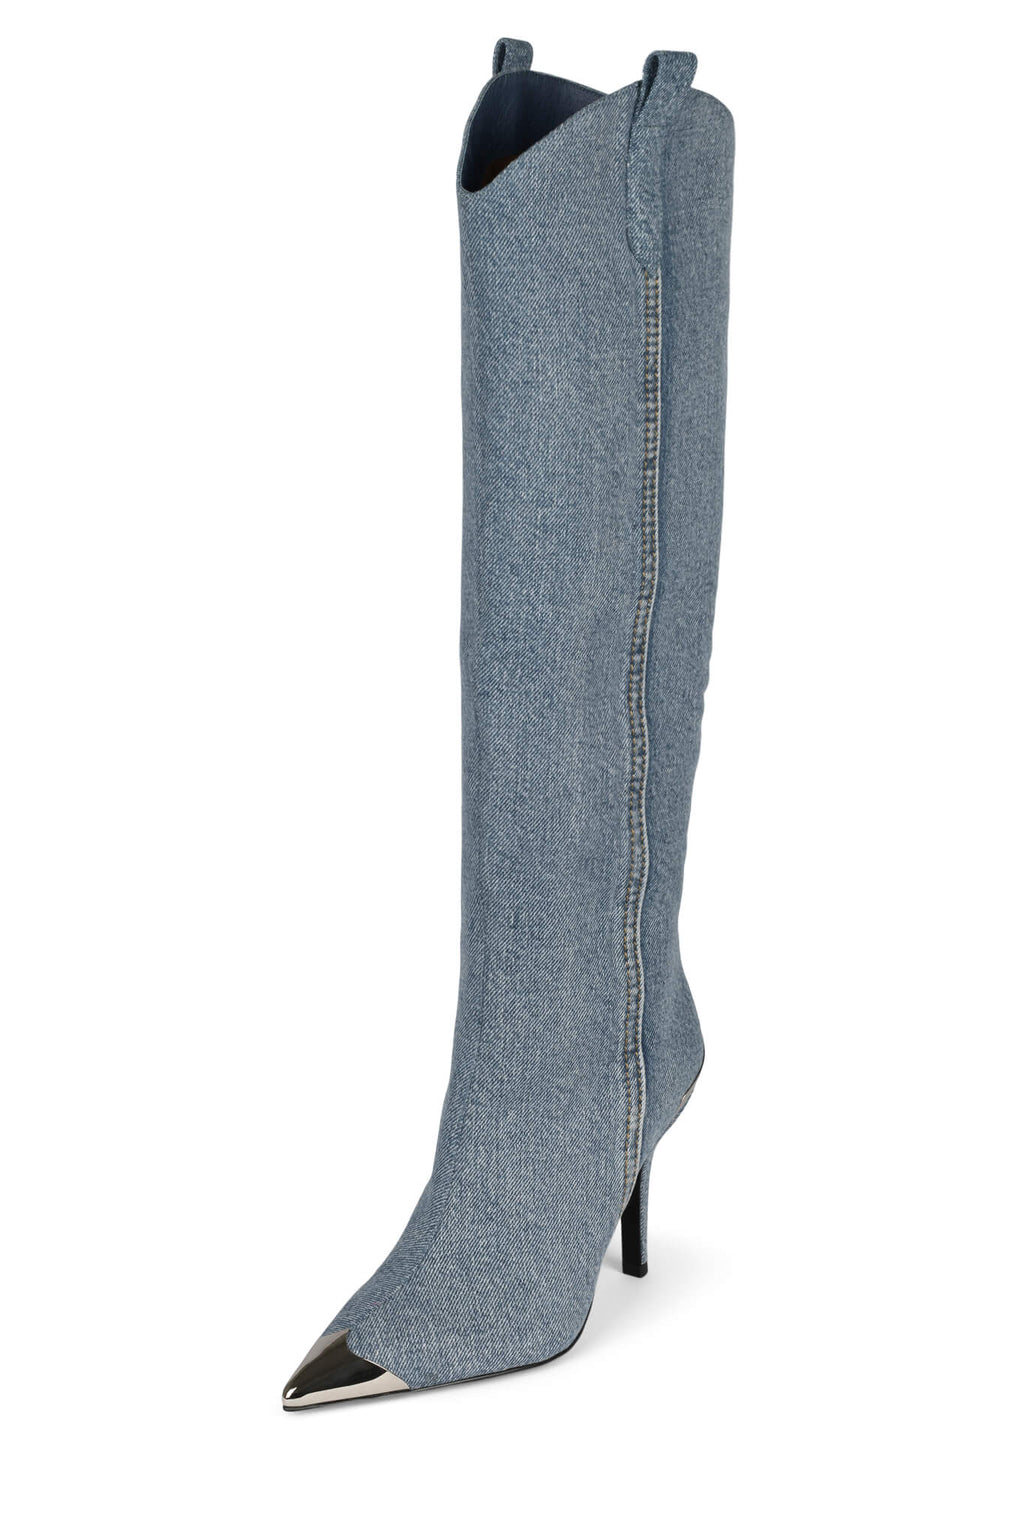 BY-GOLLY Knee-High Boot Jeffrey Campbell 